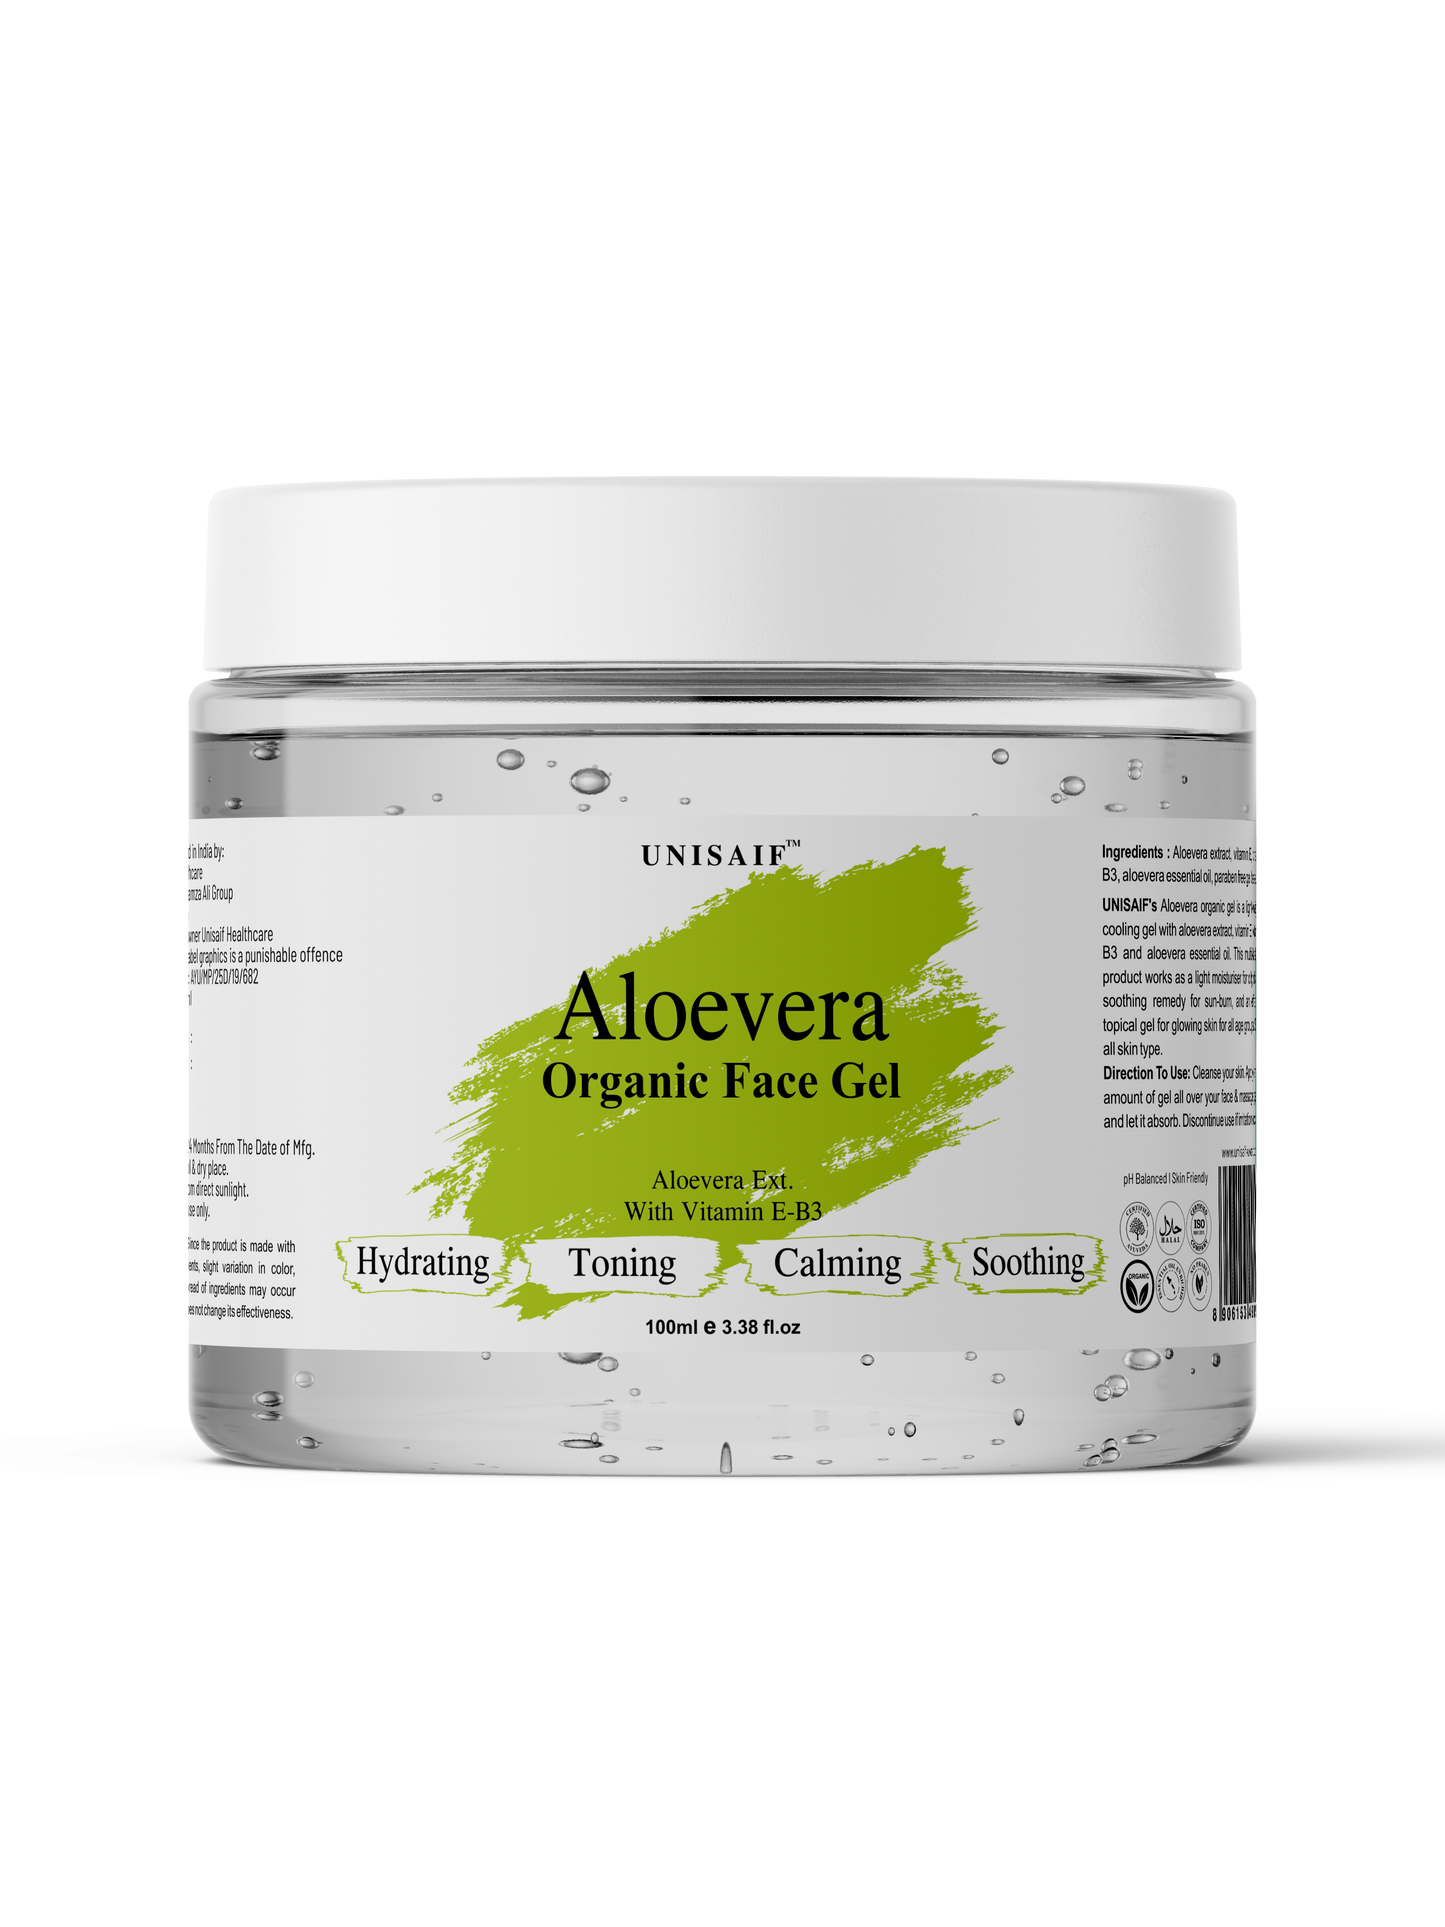 Aloevera Organic Facial Gel (100g) |Hydrating| Acne Prevention| Calming| Soothing| NO PARABEN